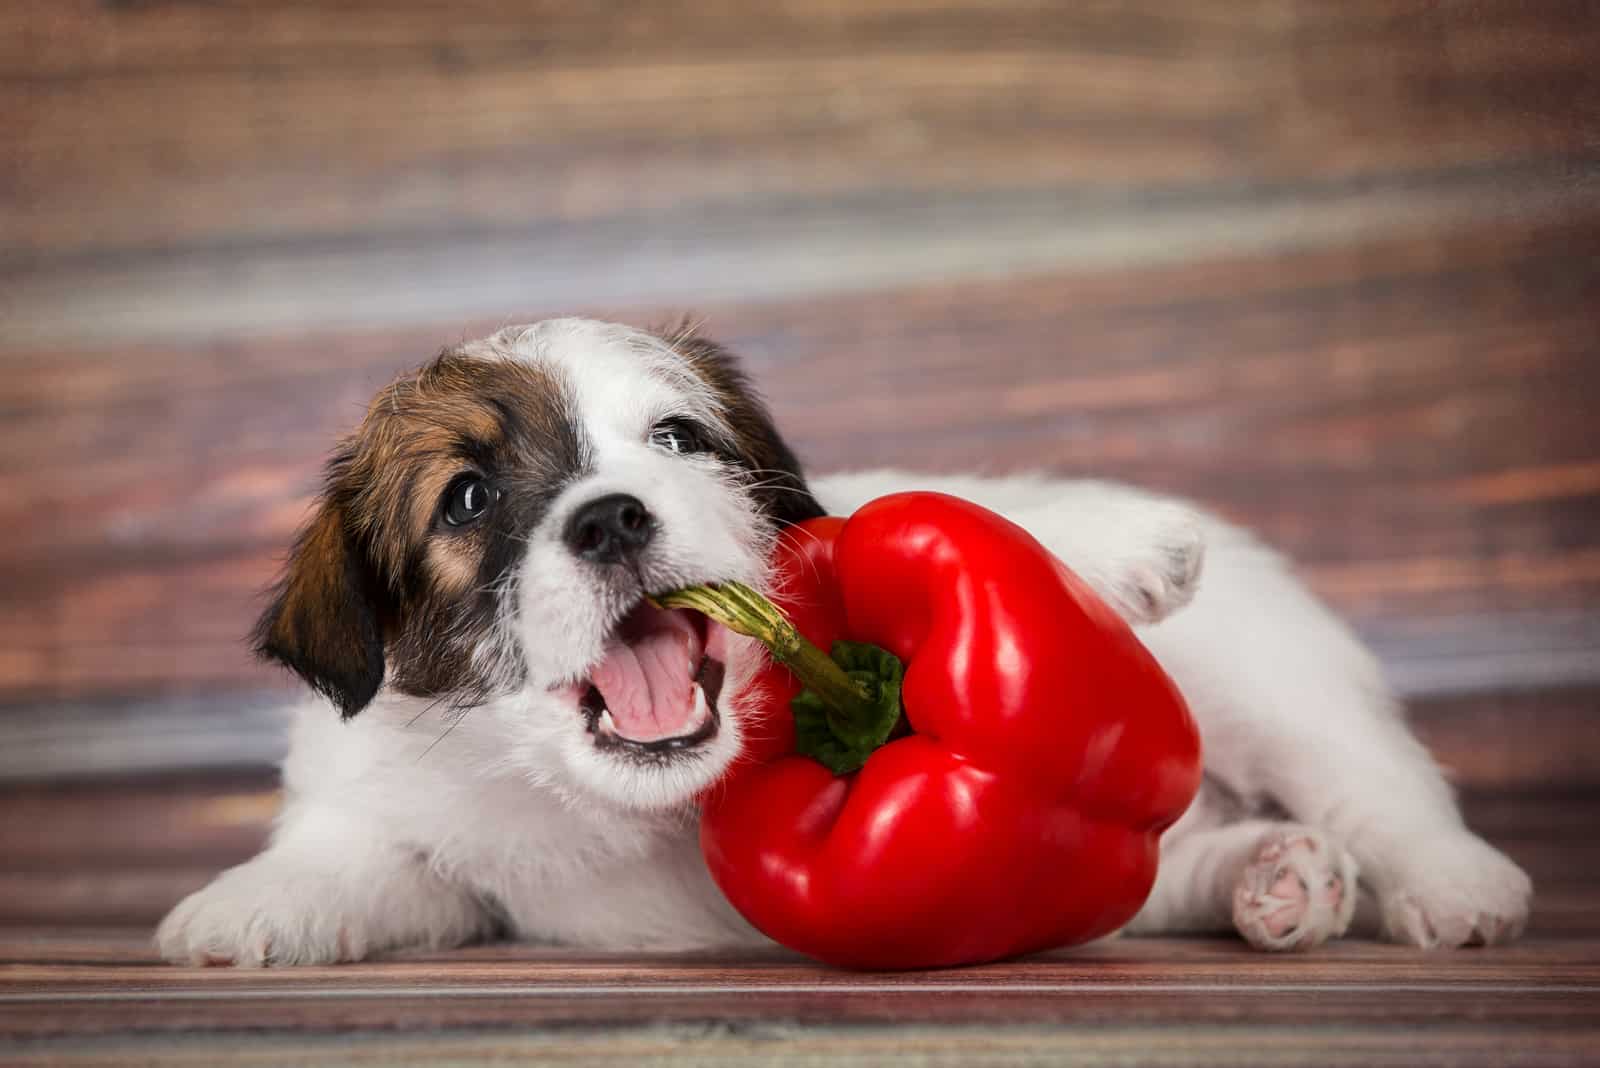 the little dog holds the pepper in his mouth